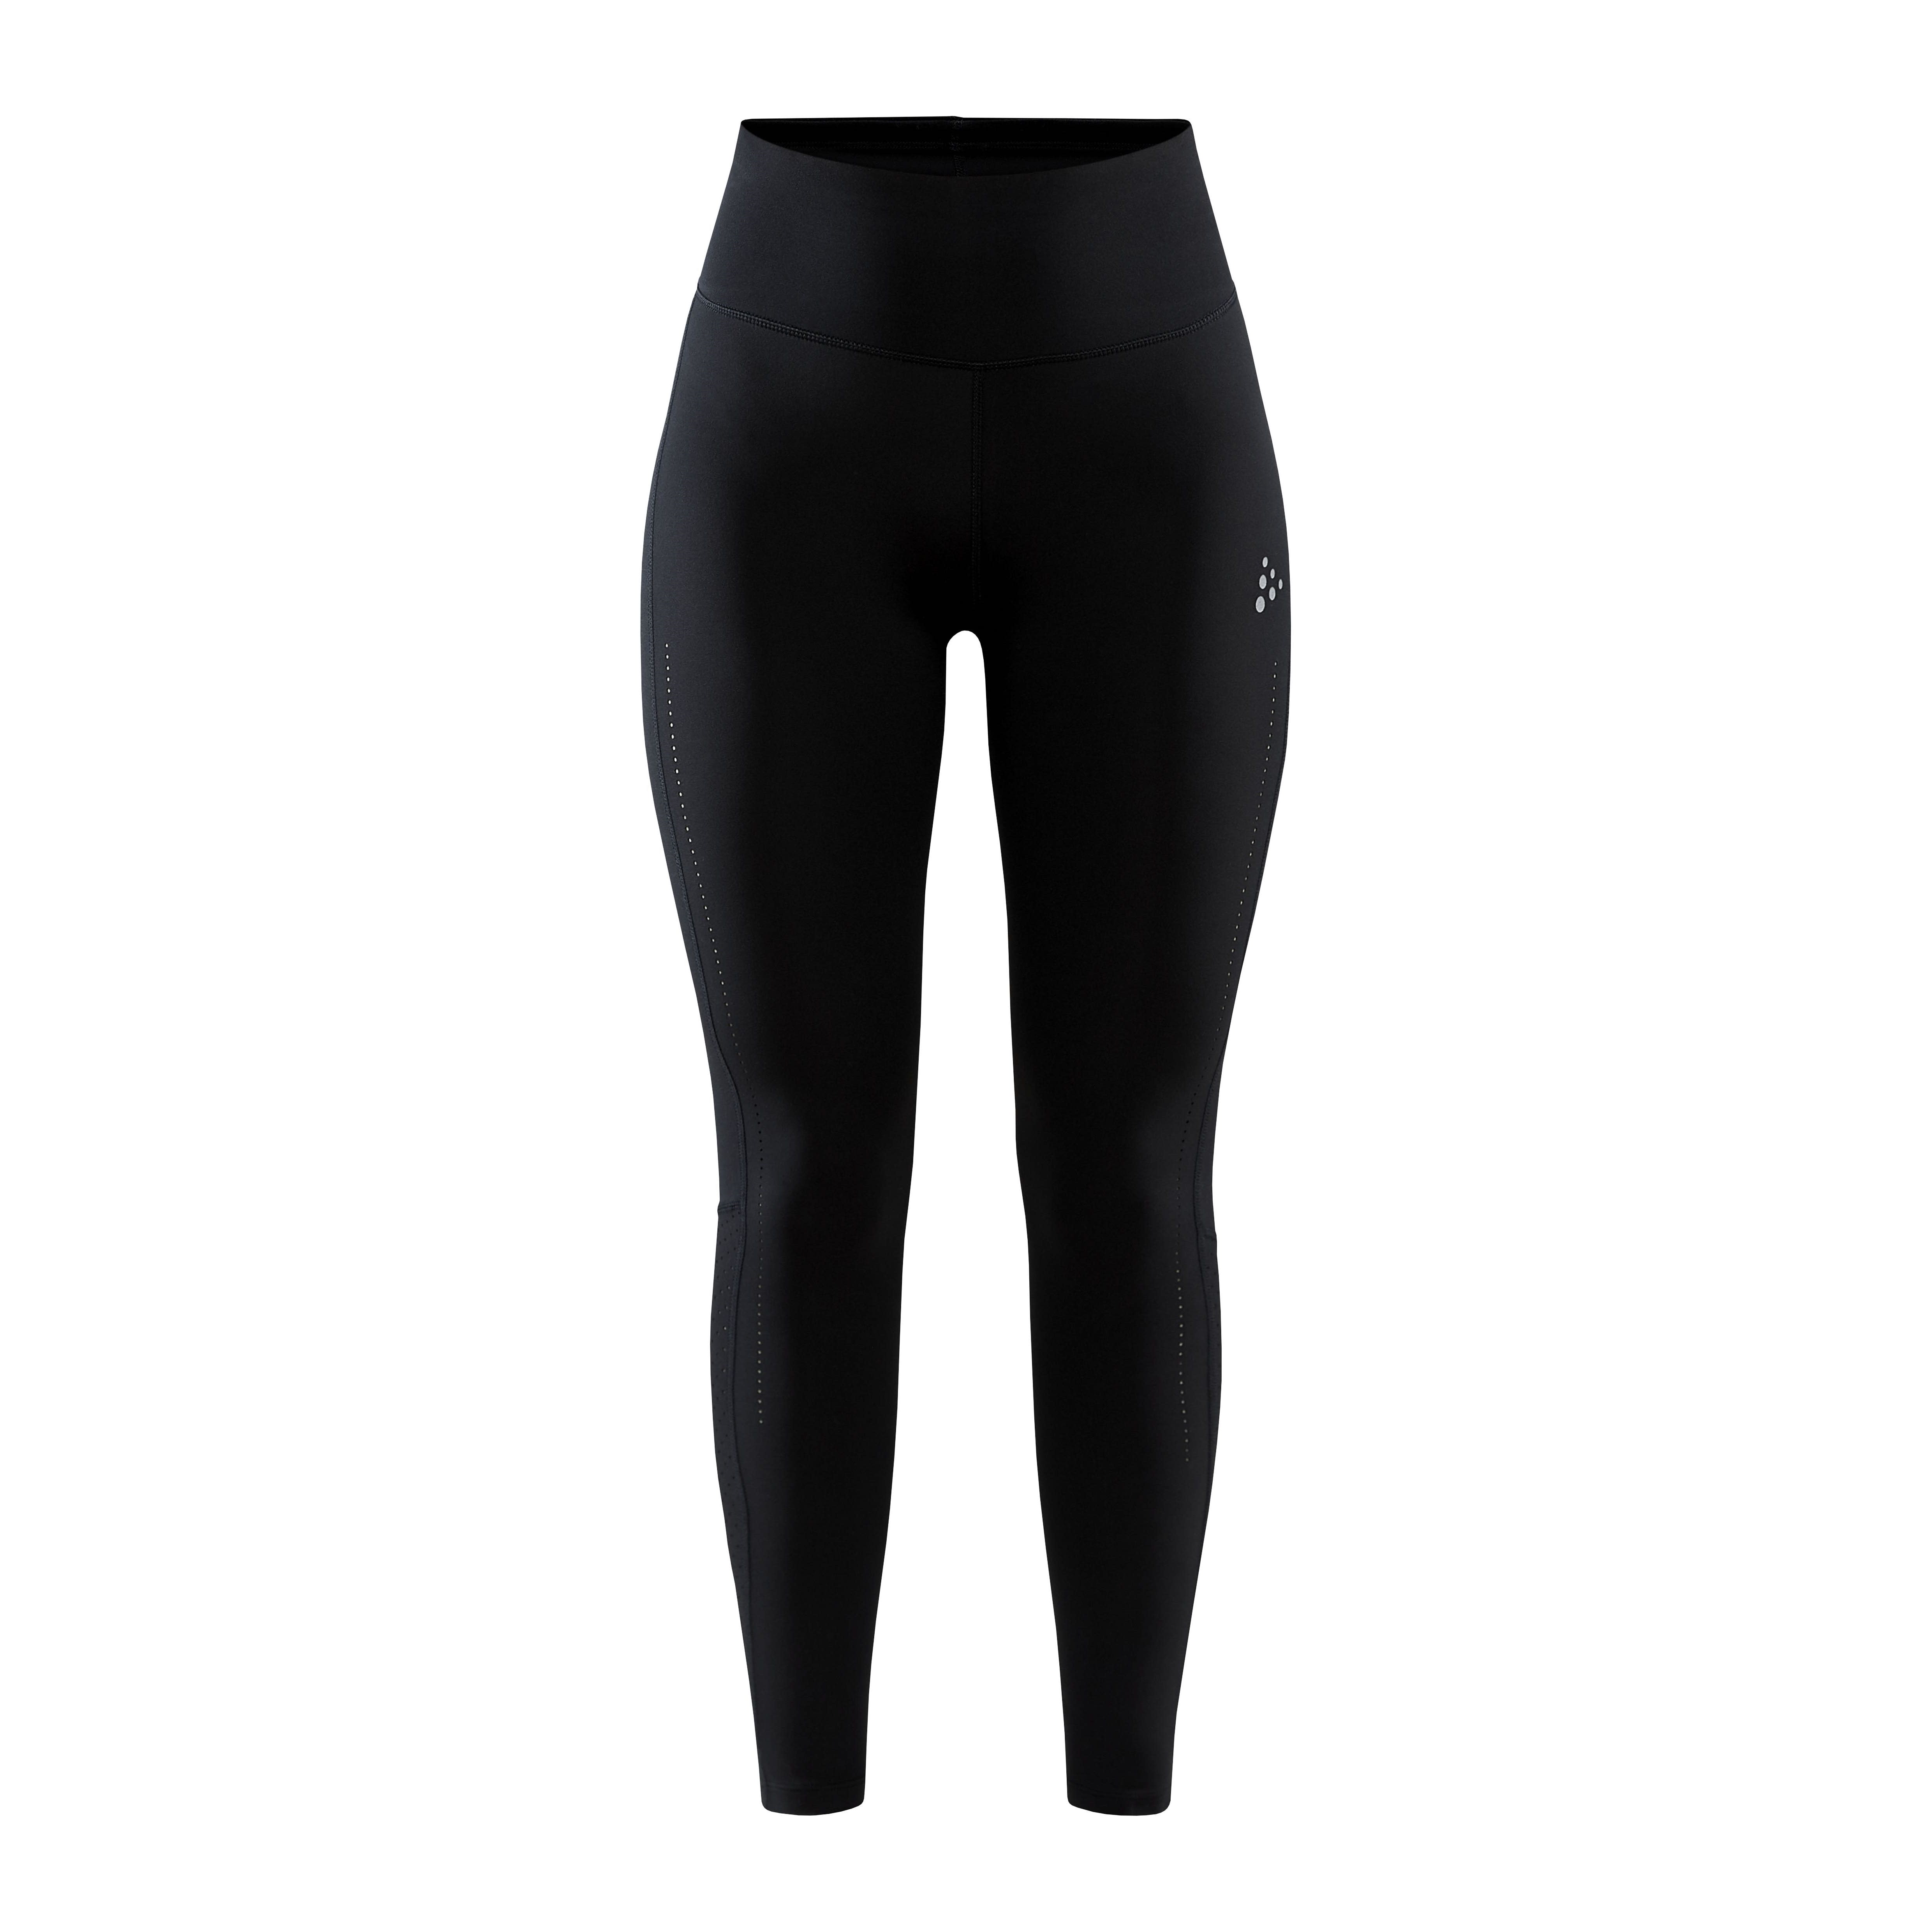 Women’s Adv Charge Perforated Tights Black